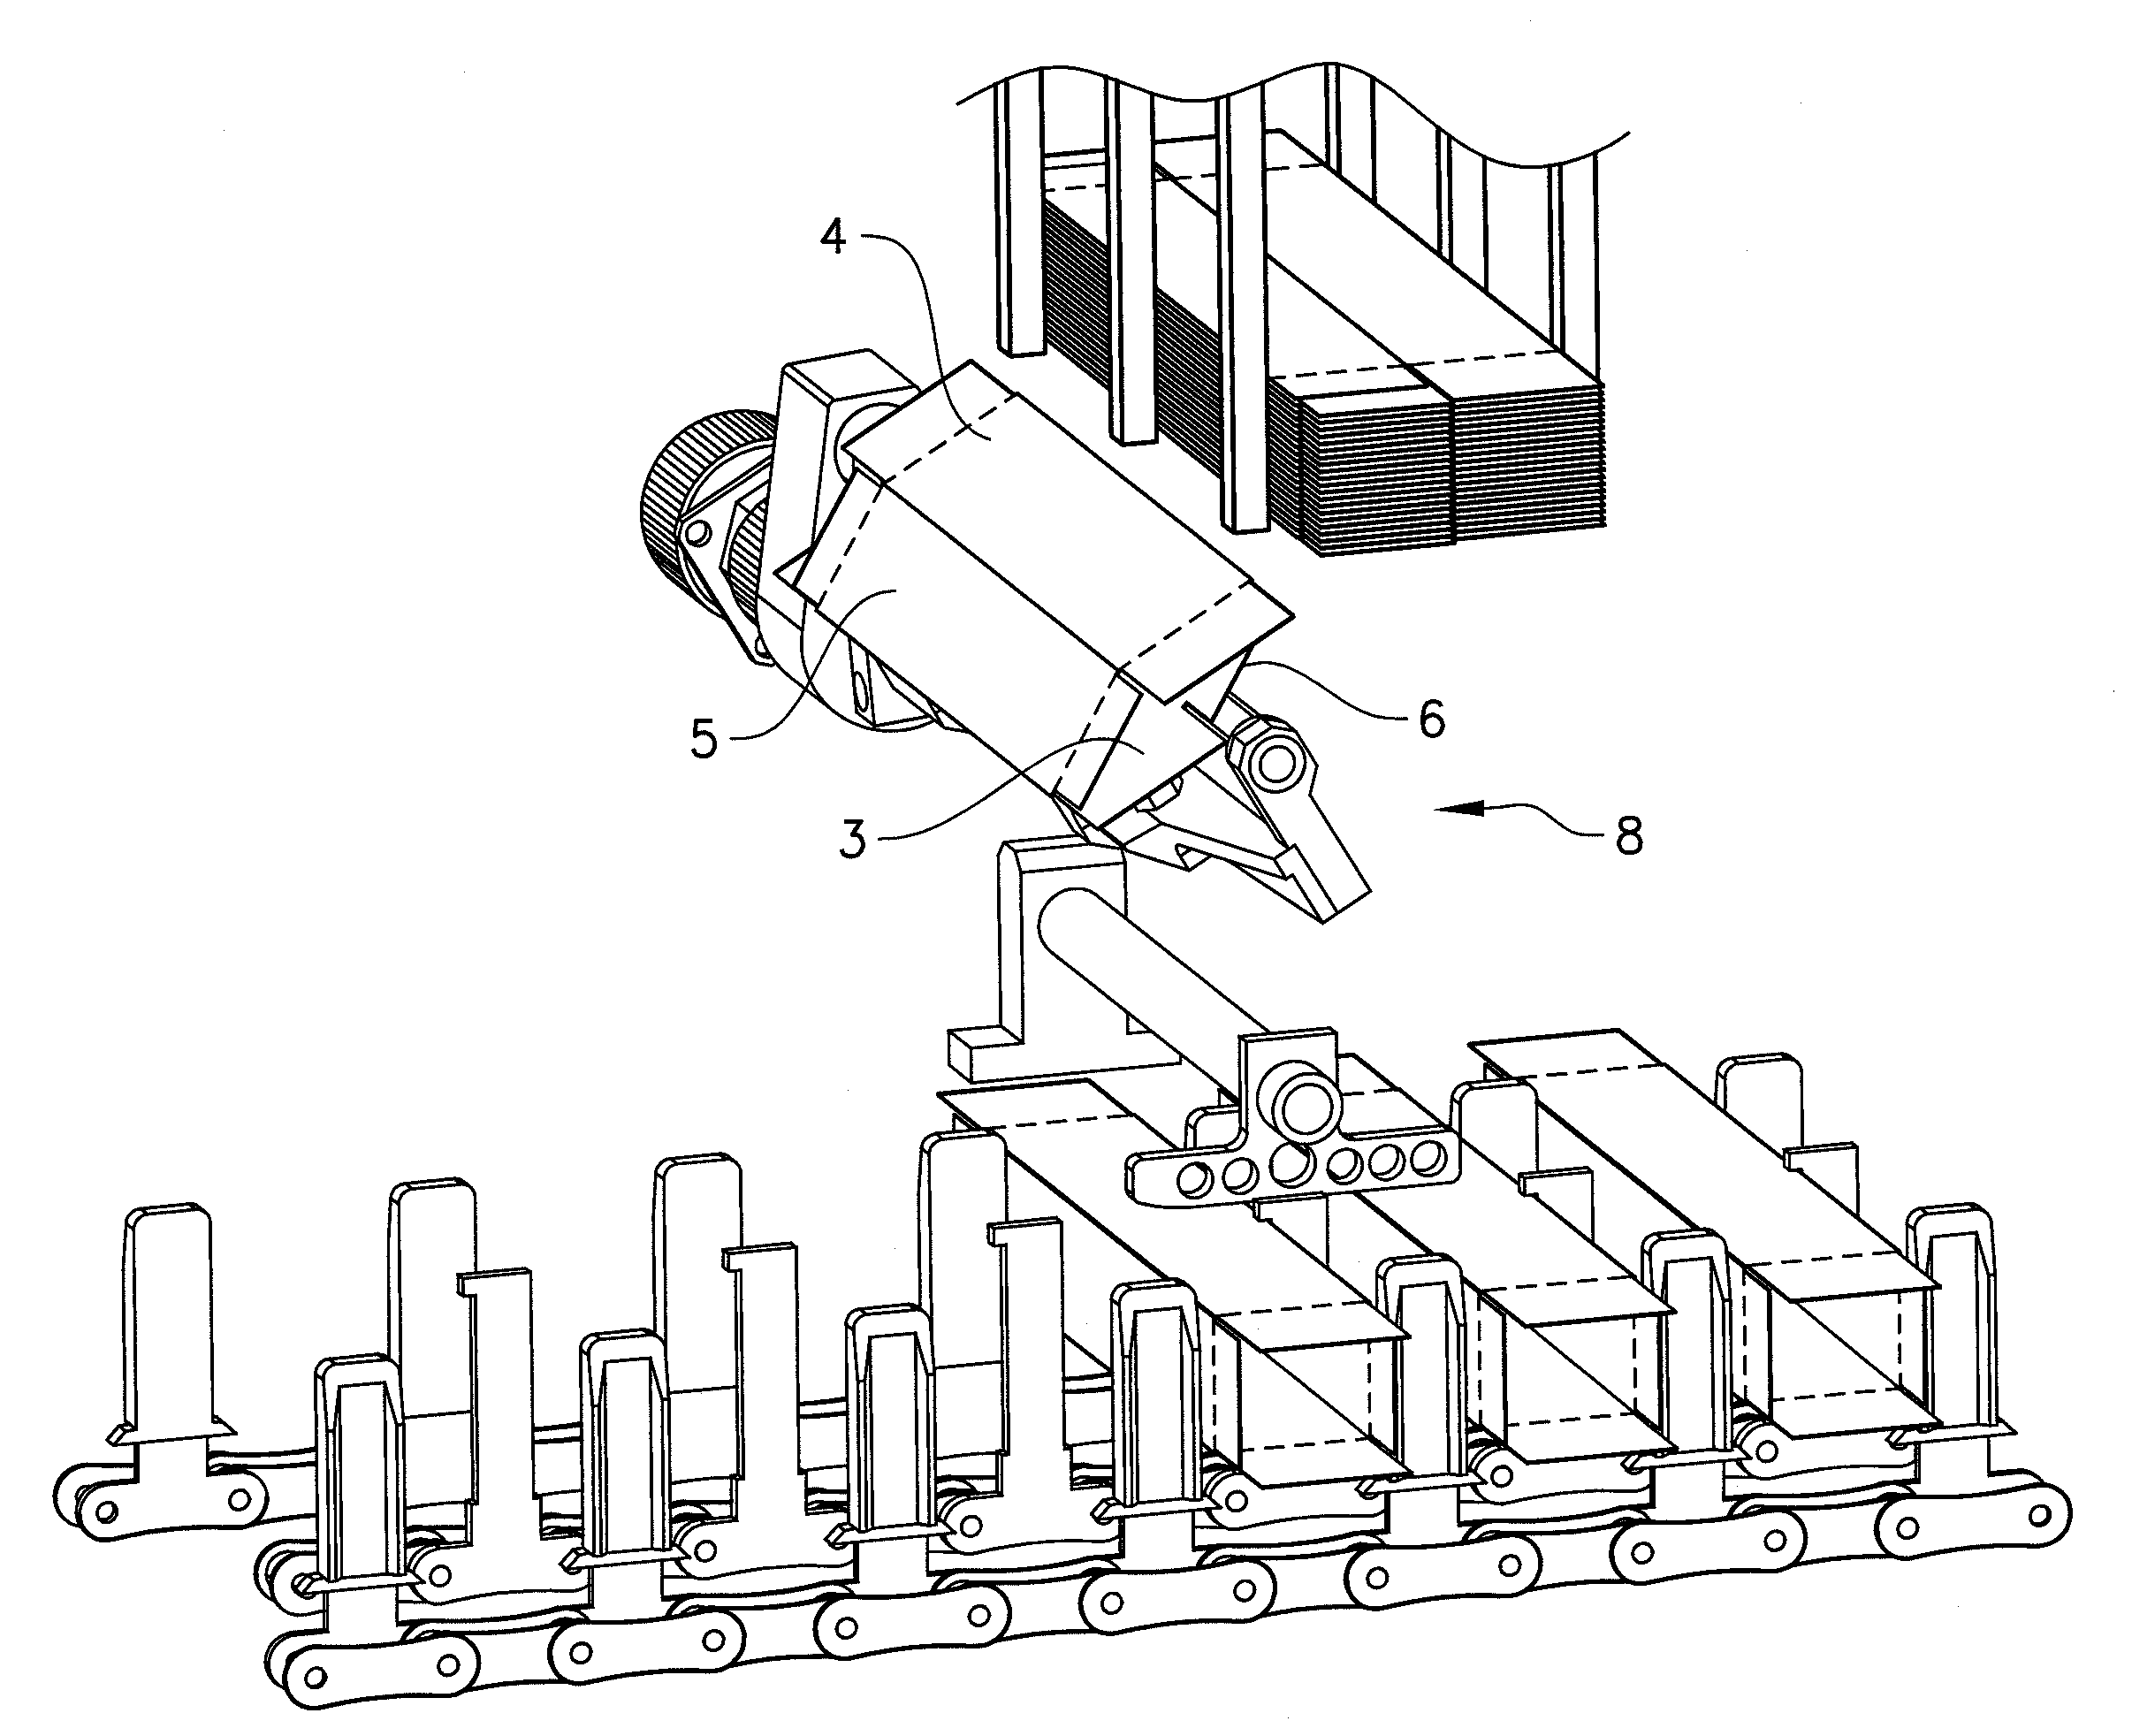 Carton feeder system and method for simultaneously feeding a plurality of cartons to a conveyor track using a  plurality of pick-up heads